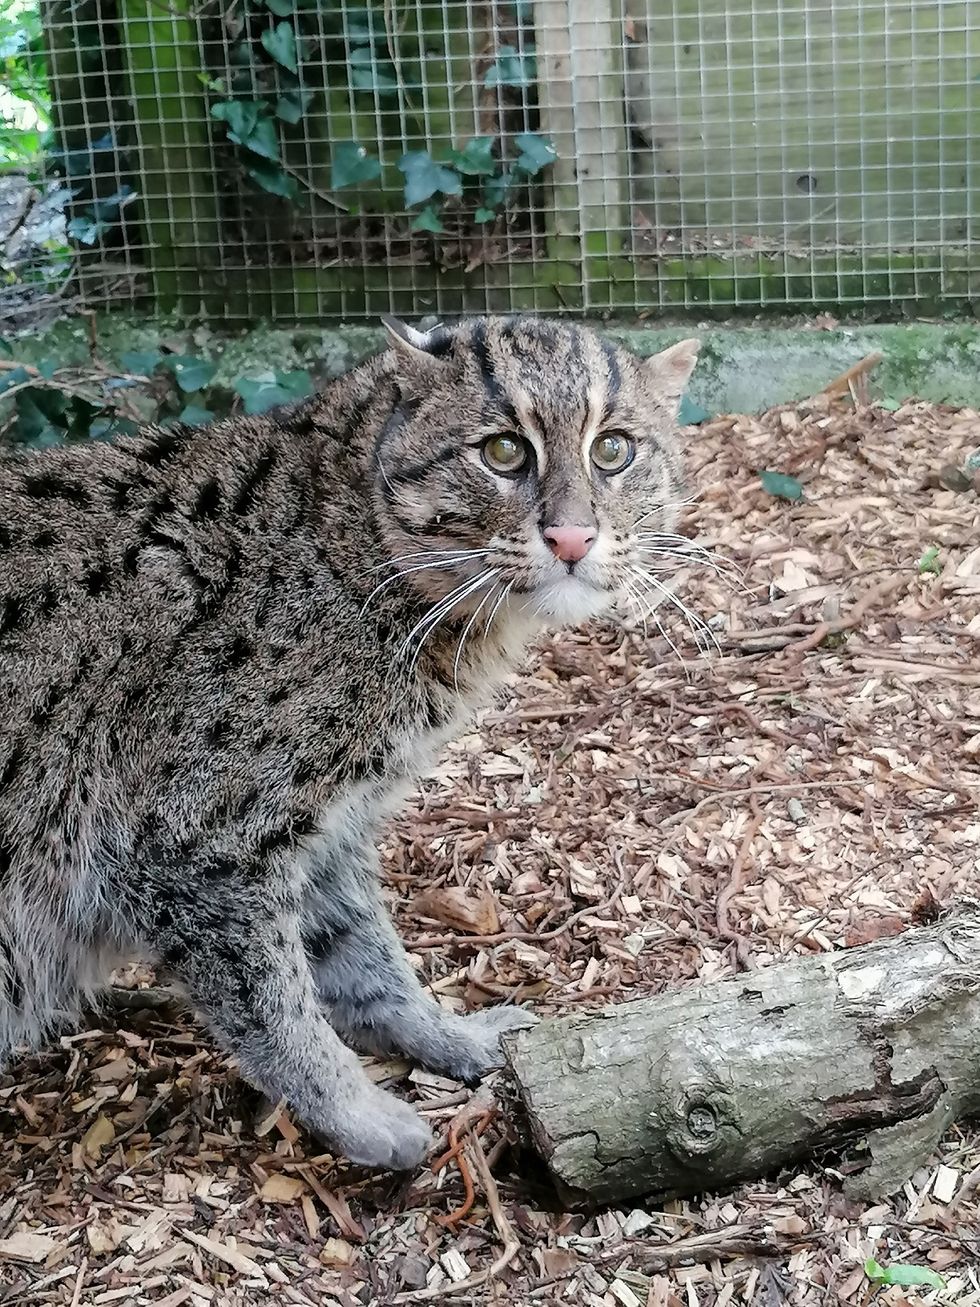 Zoo welcomes rare male fishing cat with hope there could be future kittens